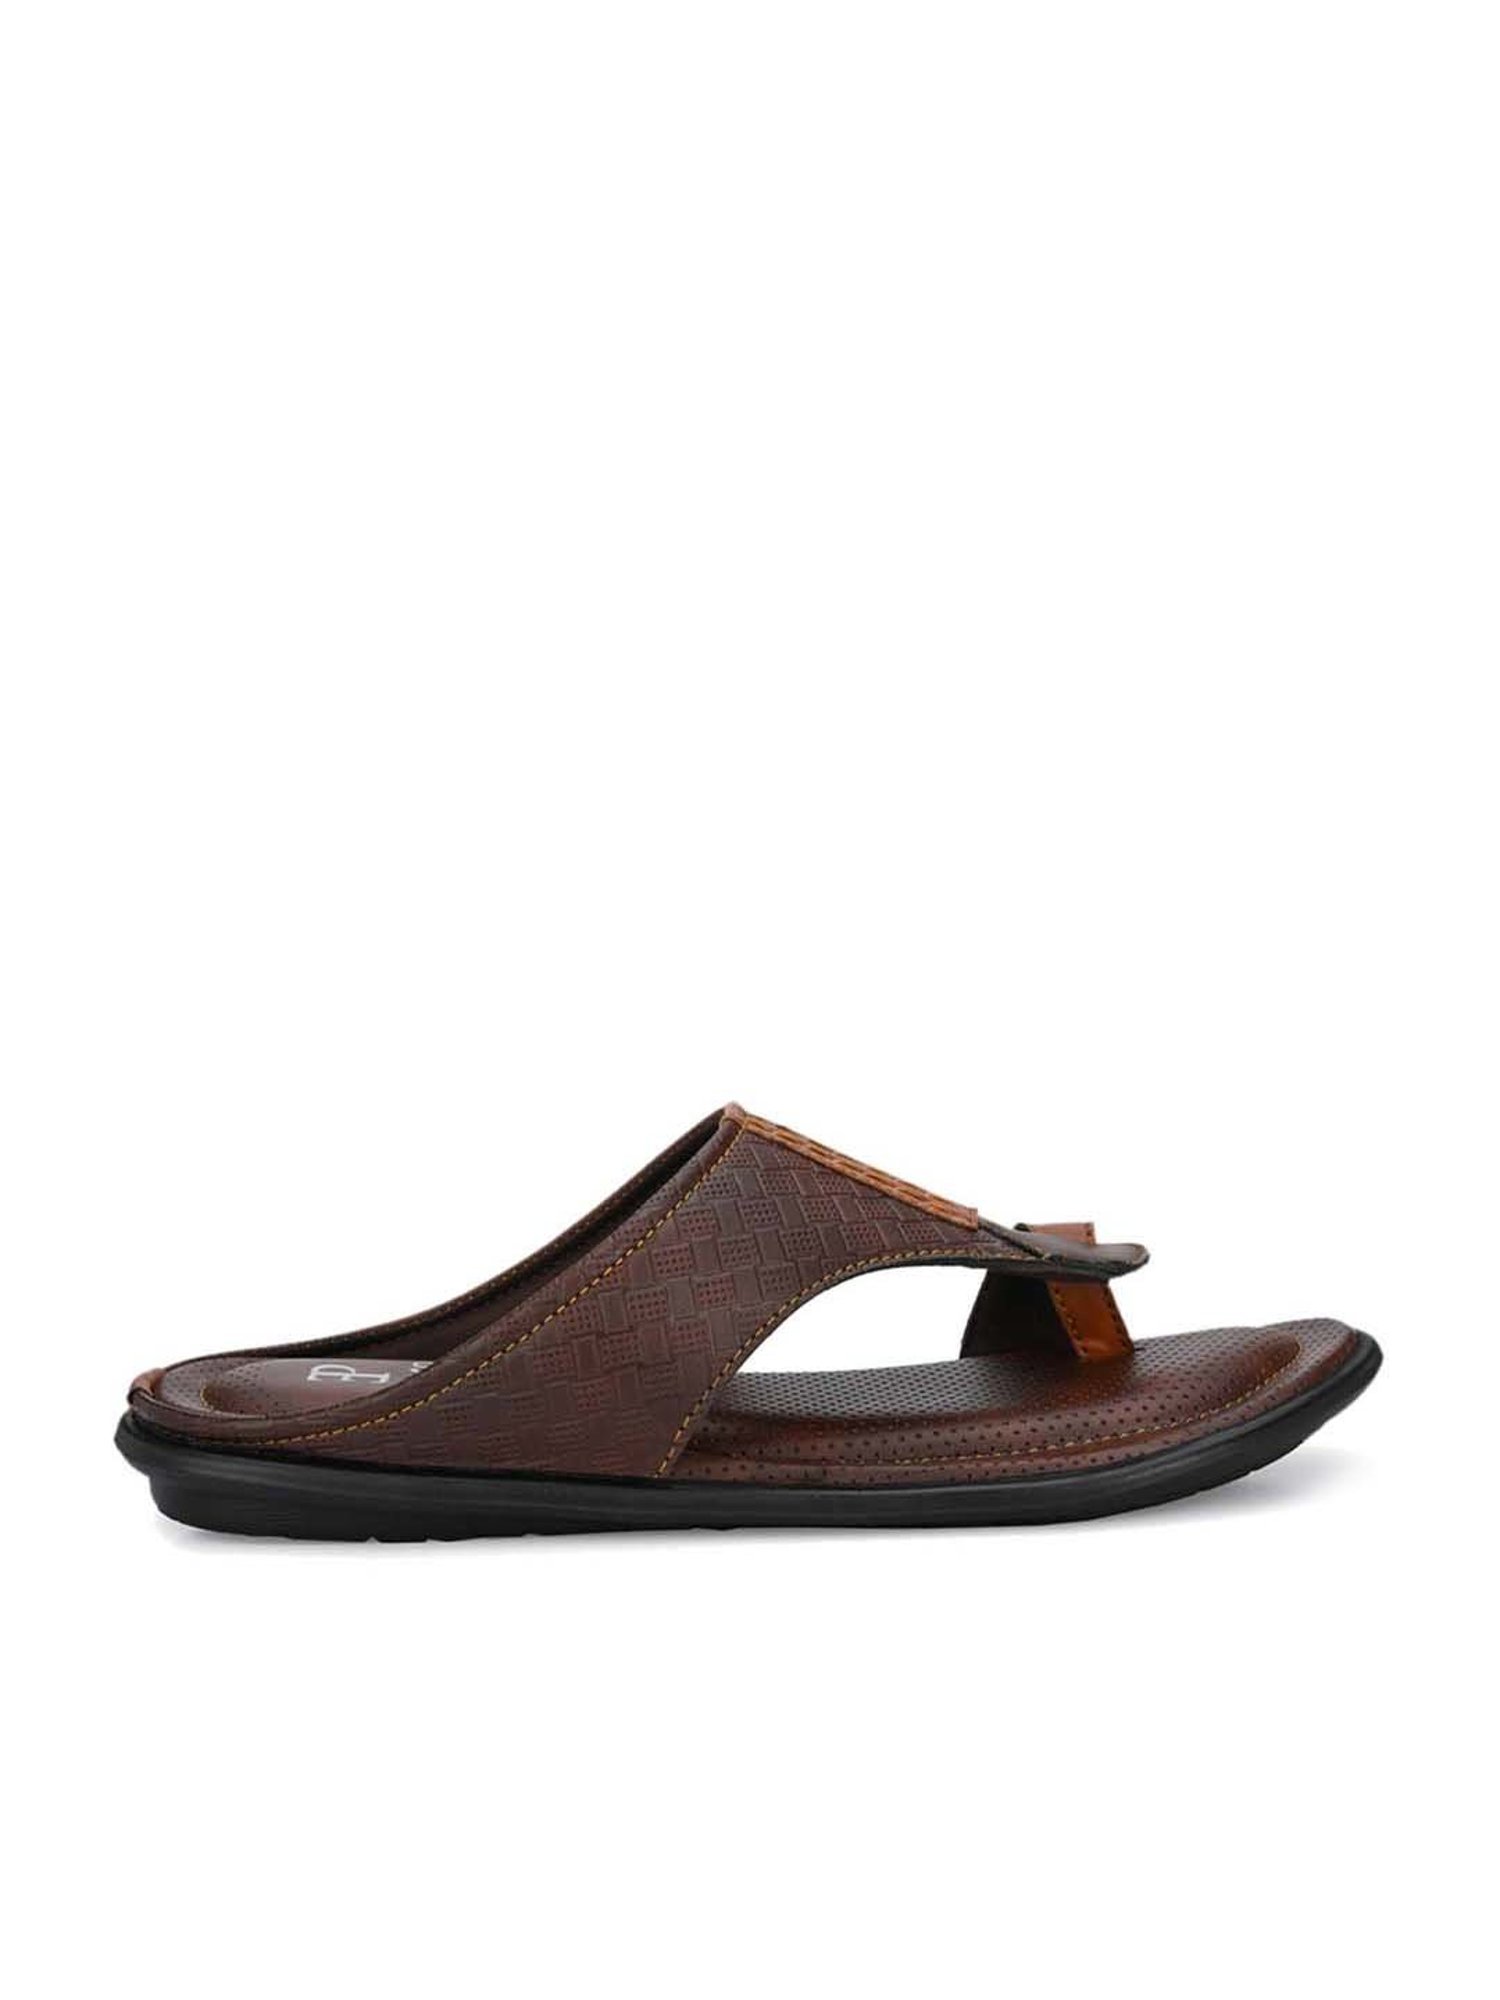 Buy EL PASO Synthetic Leather Regular Slip On Mens Sandals | Shoppers Stop